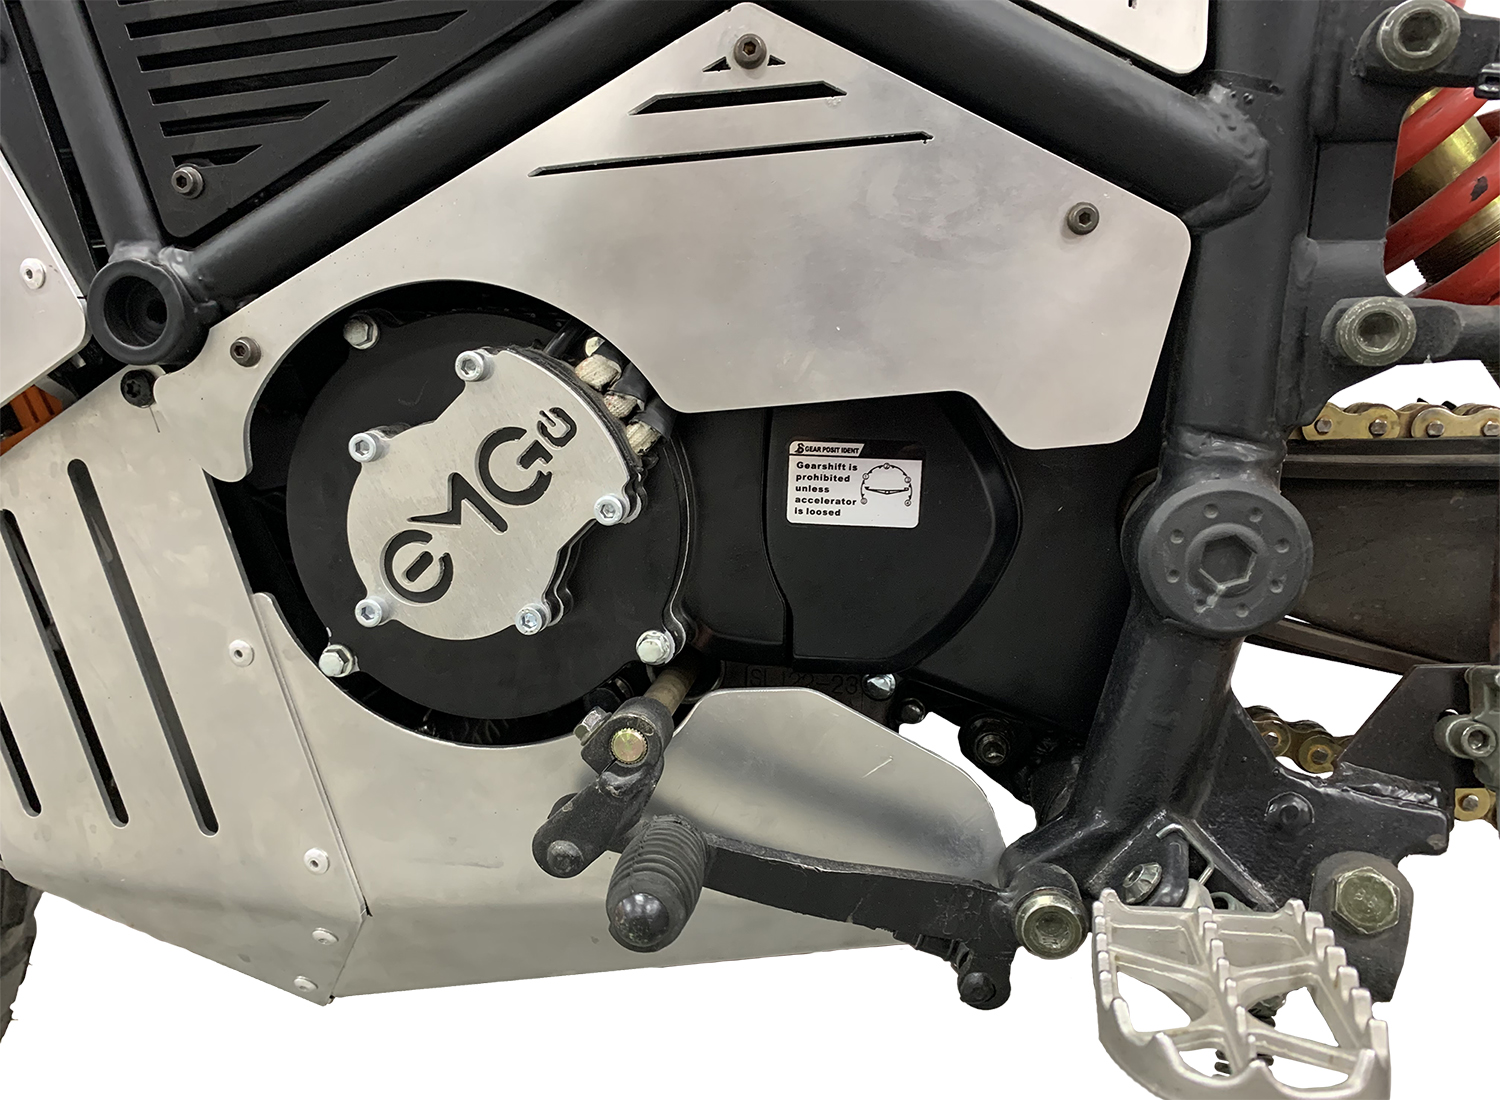 A view of the all-new ScrAmper electric motorcycle which will be available on Indiegogo by the next of next week